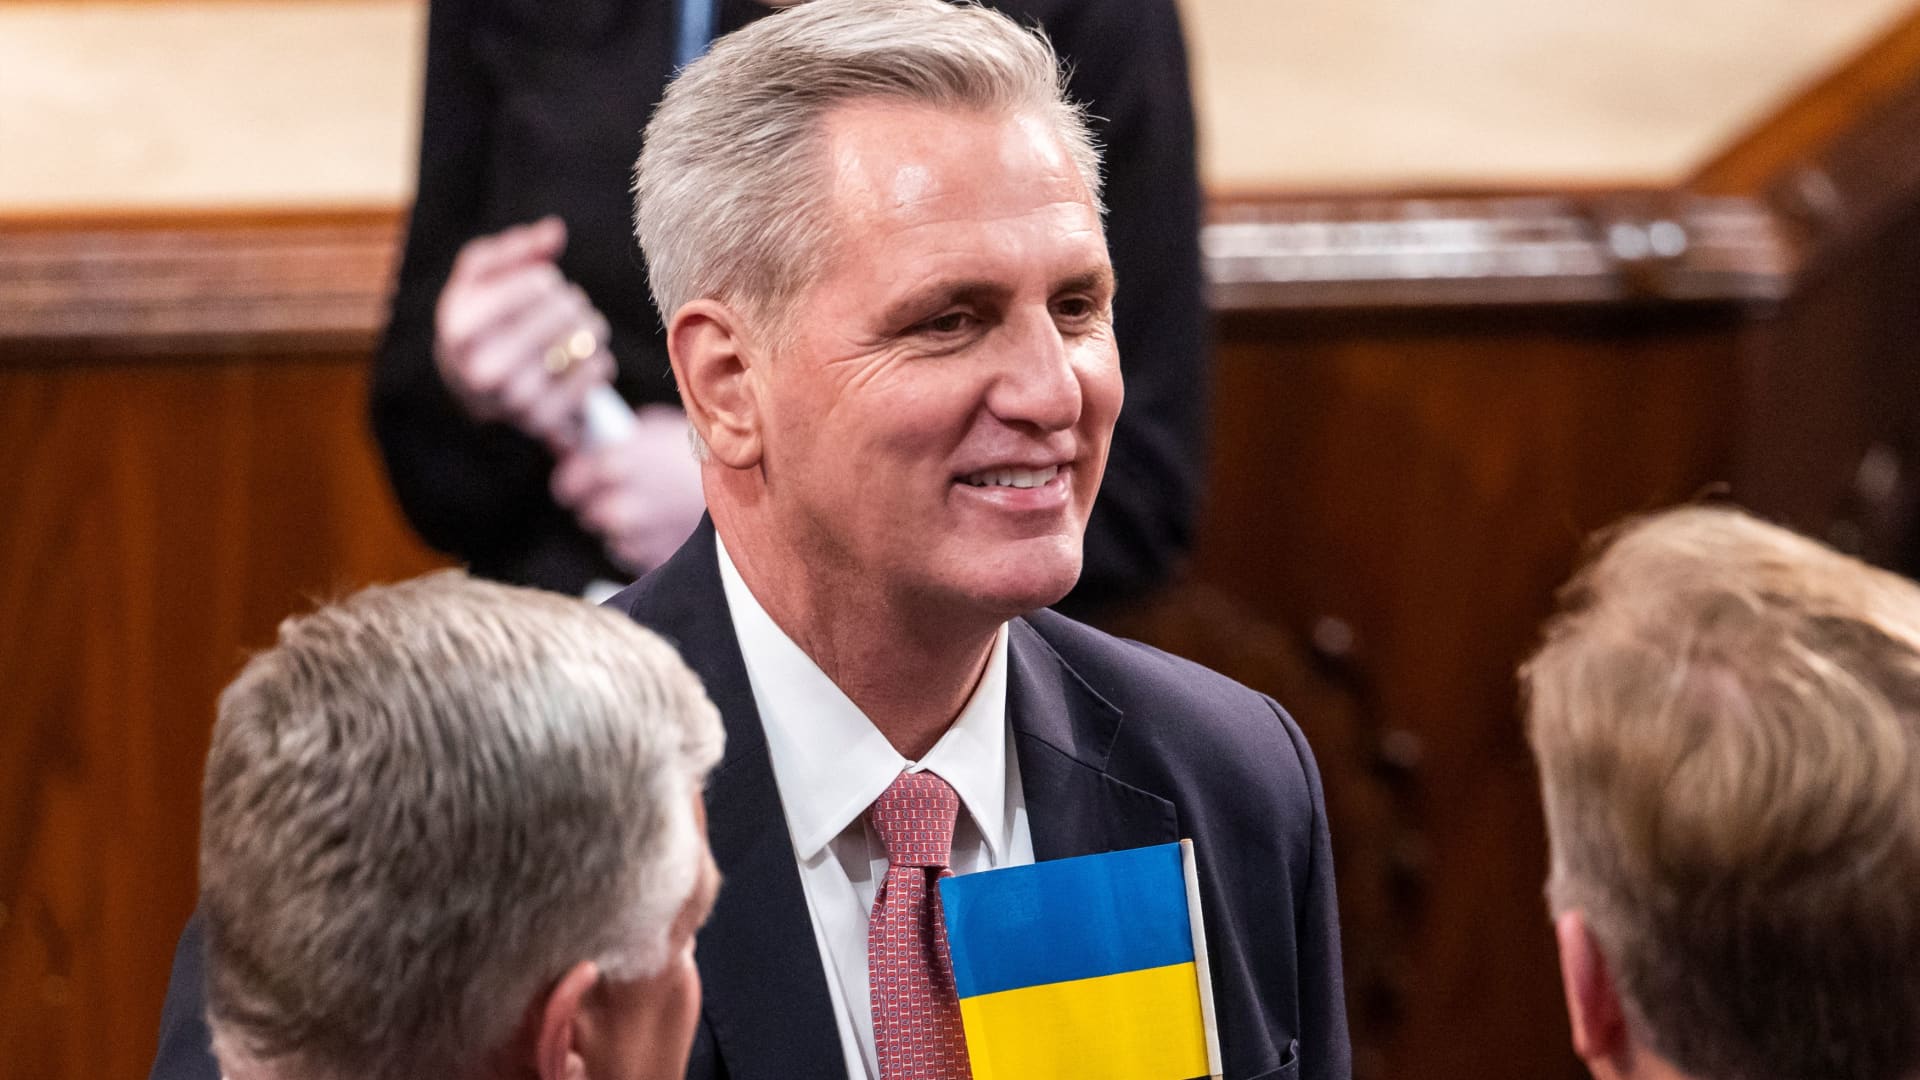 Republican House Minority Leader Kevin McCarthy (R-CA) wears a Ukrainian flag to US President Joe Biden's State of the Union Address in the US Capitol in Washington, DC, U.S., March 1, 2022. Jim Lo Scalzo/Pool via REUTERS